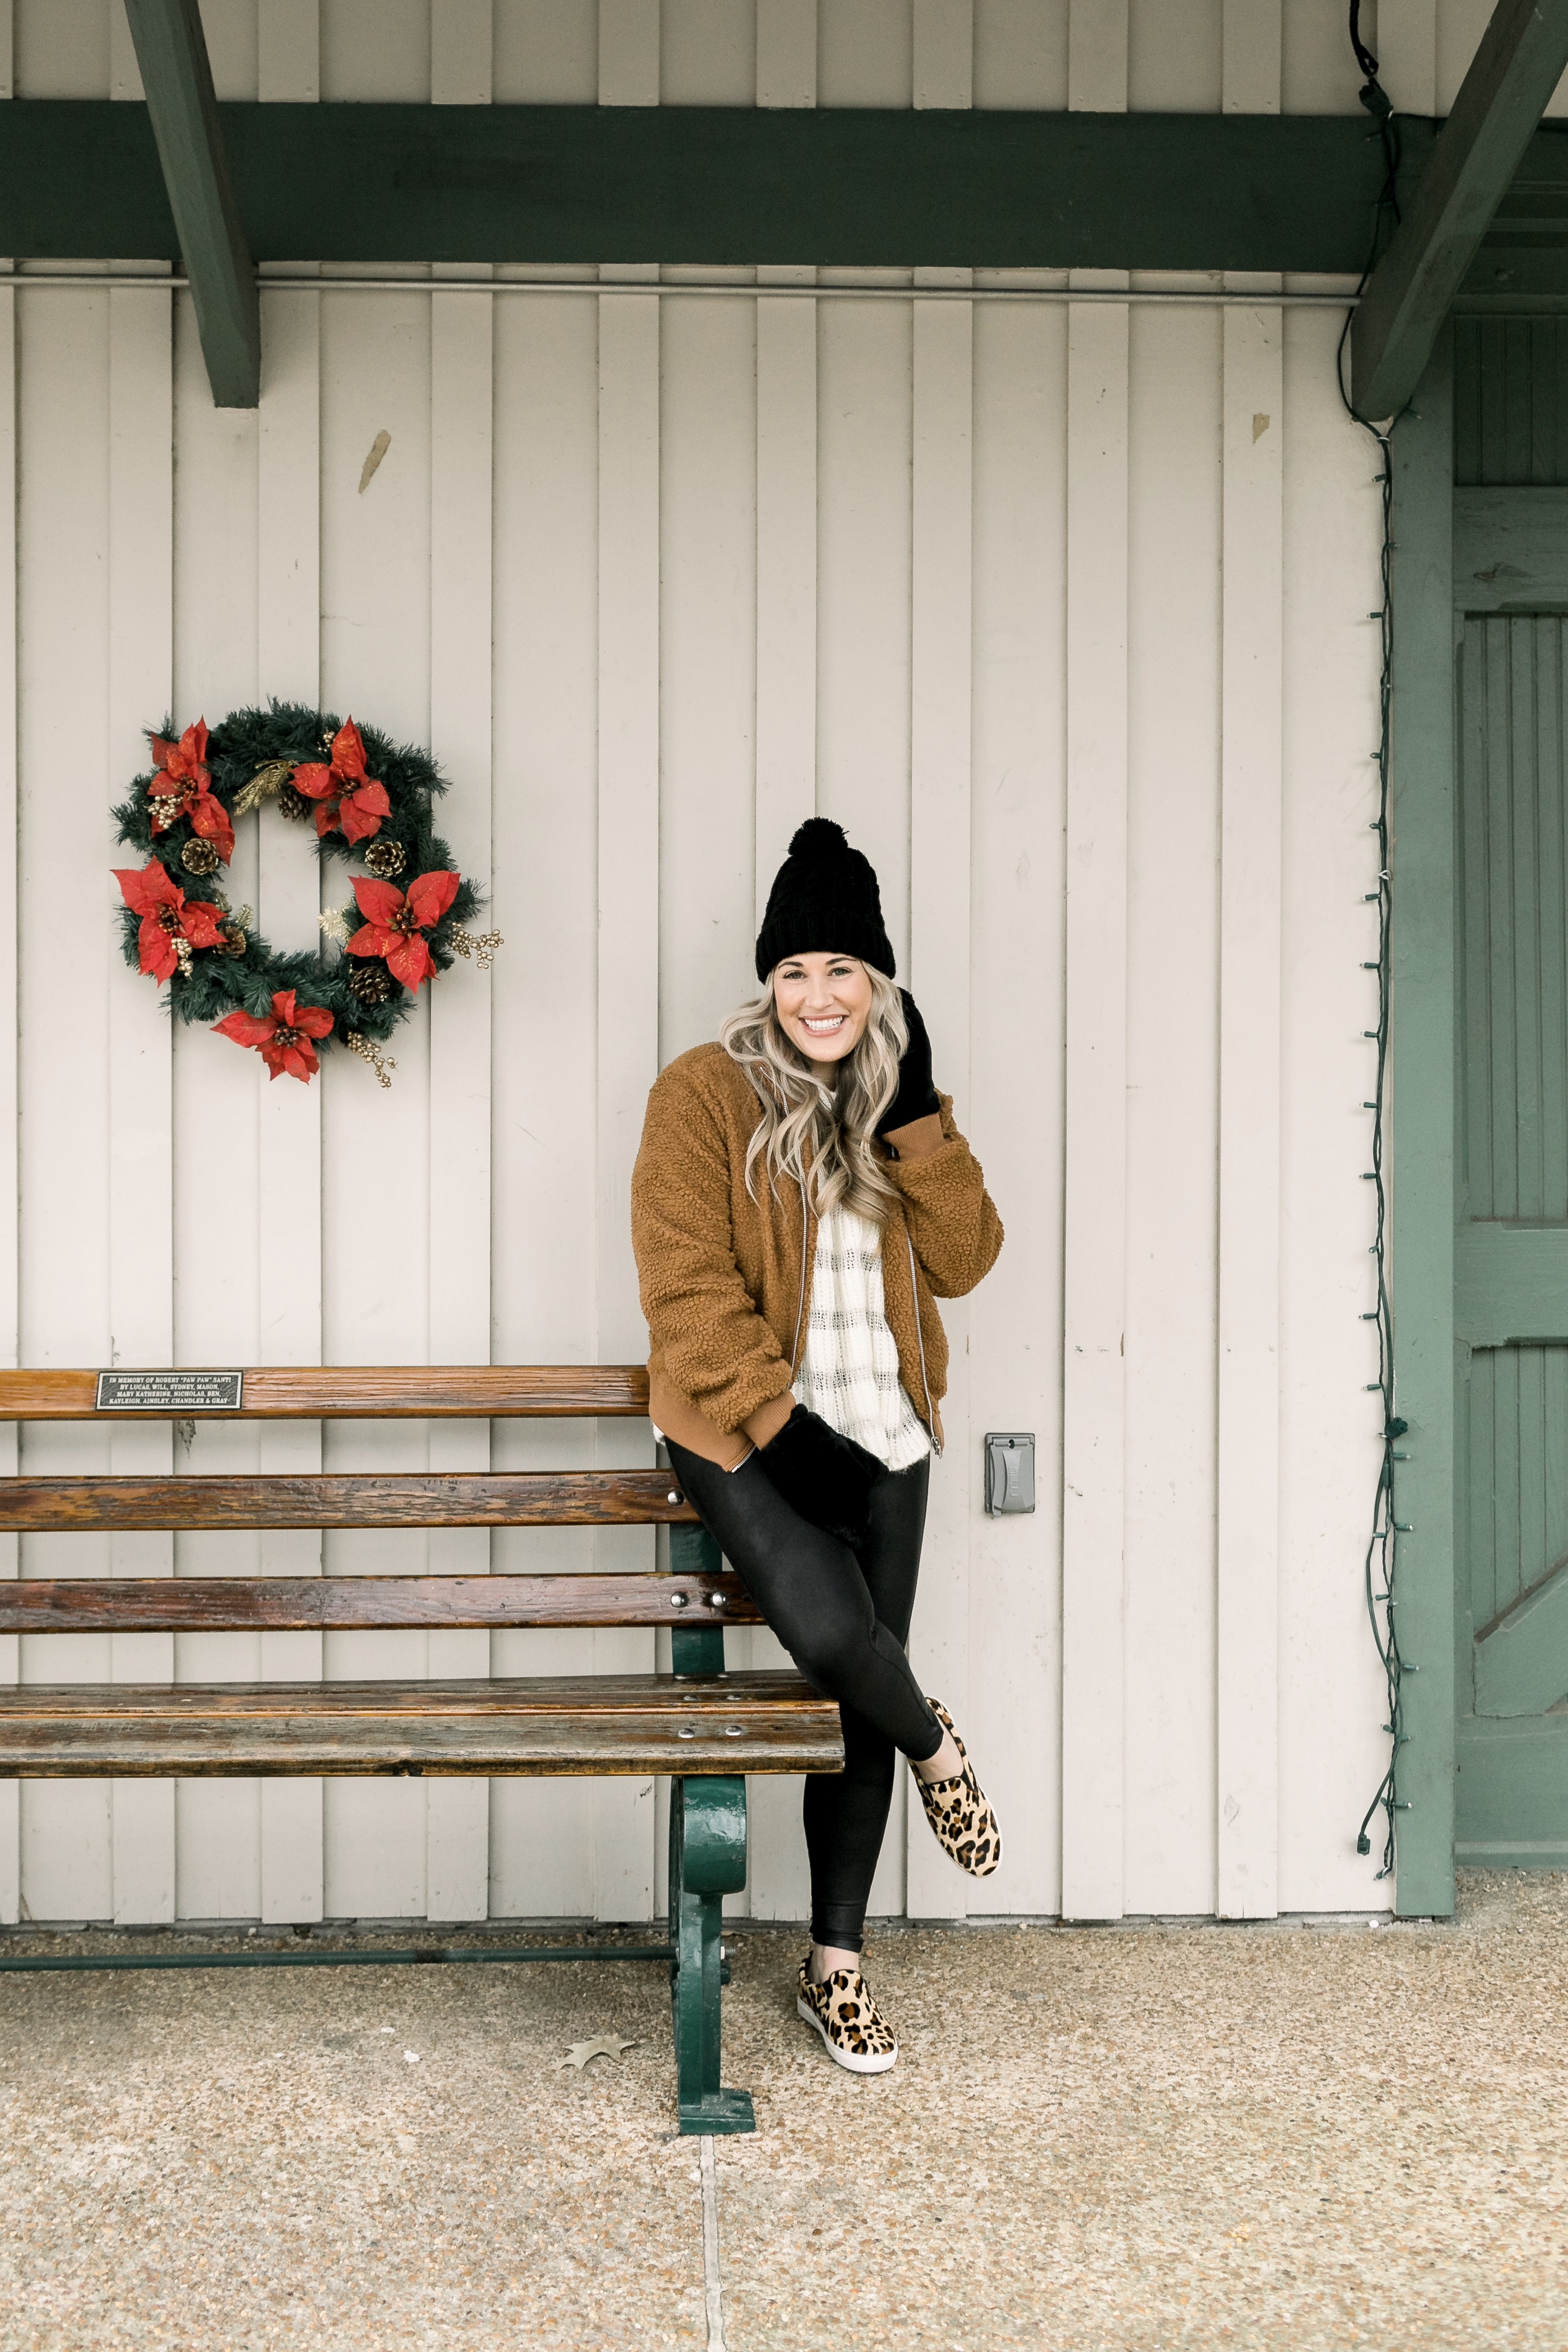 Cozy winter look styled by top US fashion blog, Walking in Memphis in High Heels: image of a woman wearing a Free People cropped sweater, New York Accessory Group pom beanie, Love + Joy teddy bear jacket, Kohl’s faux fur mittens, and Steve Madden leopard sneakers.